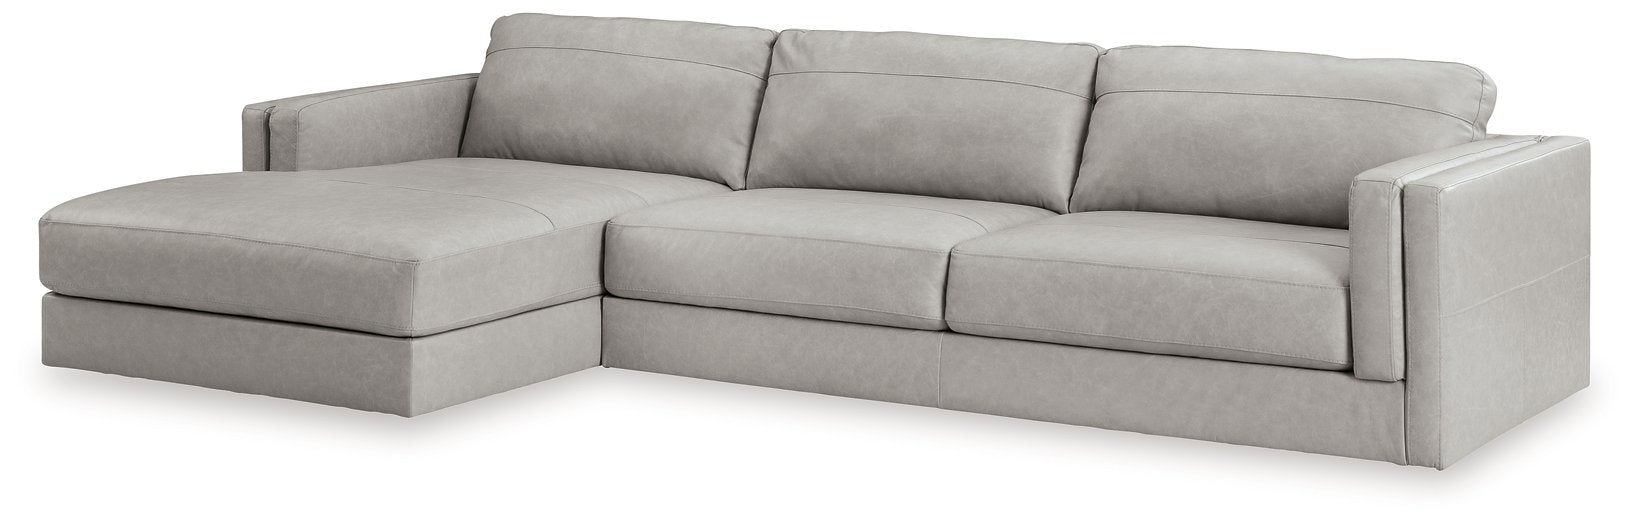 Amiata Sectional with Chaise